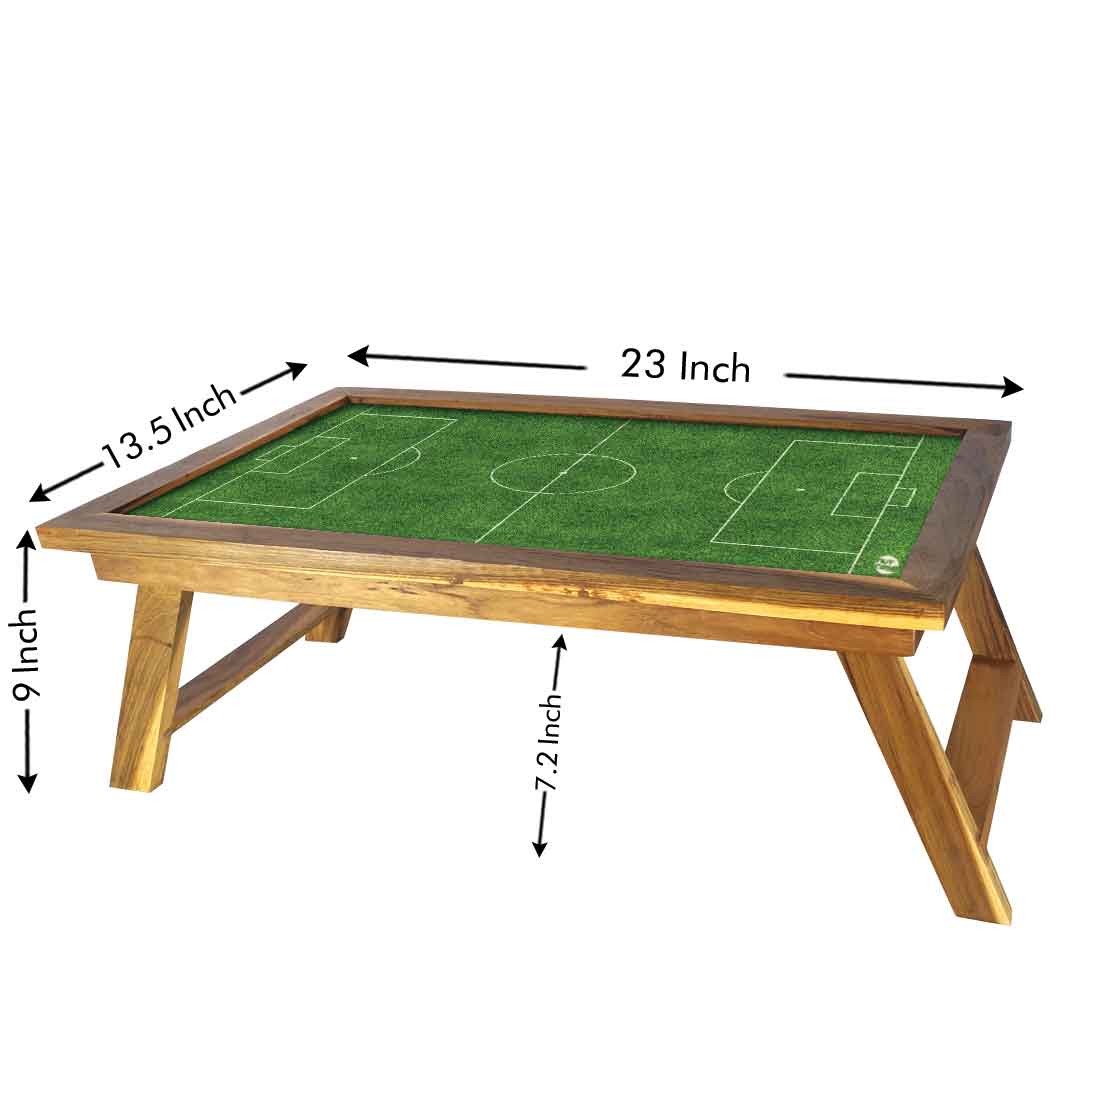 Designer Bed Breakfast Folding Laptop Table for Home - Football Pitch Nutcase